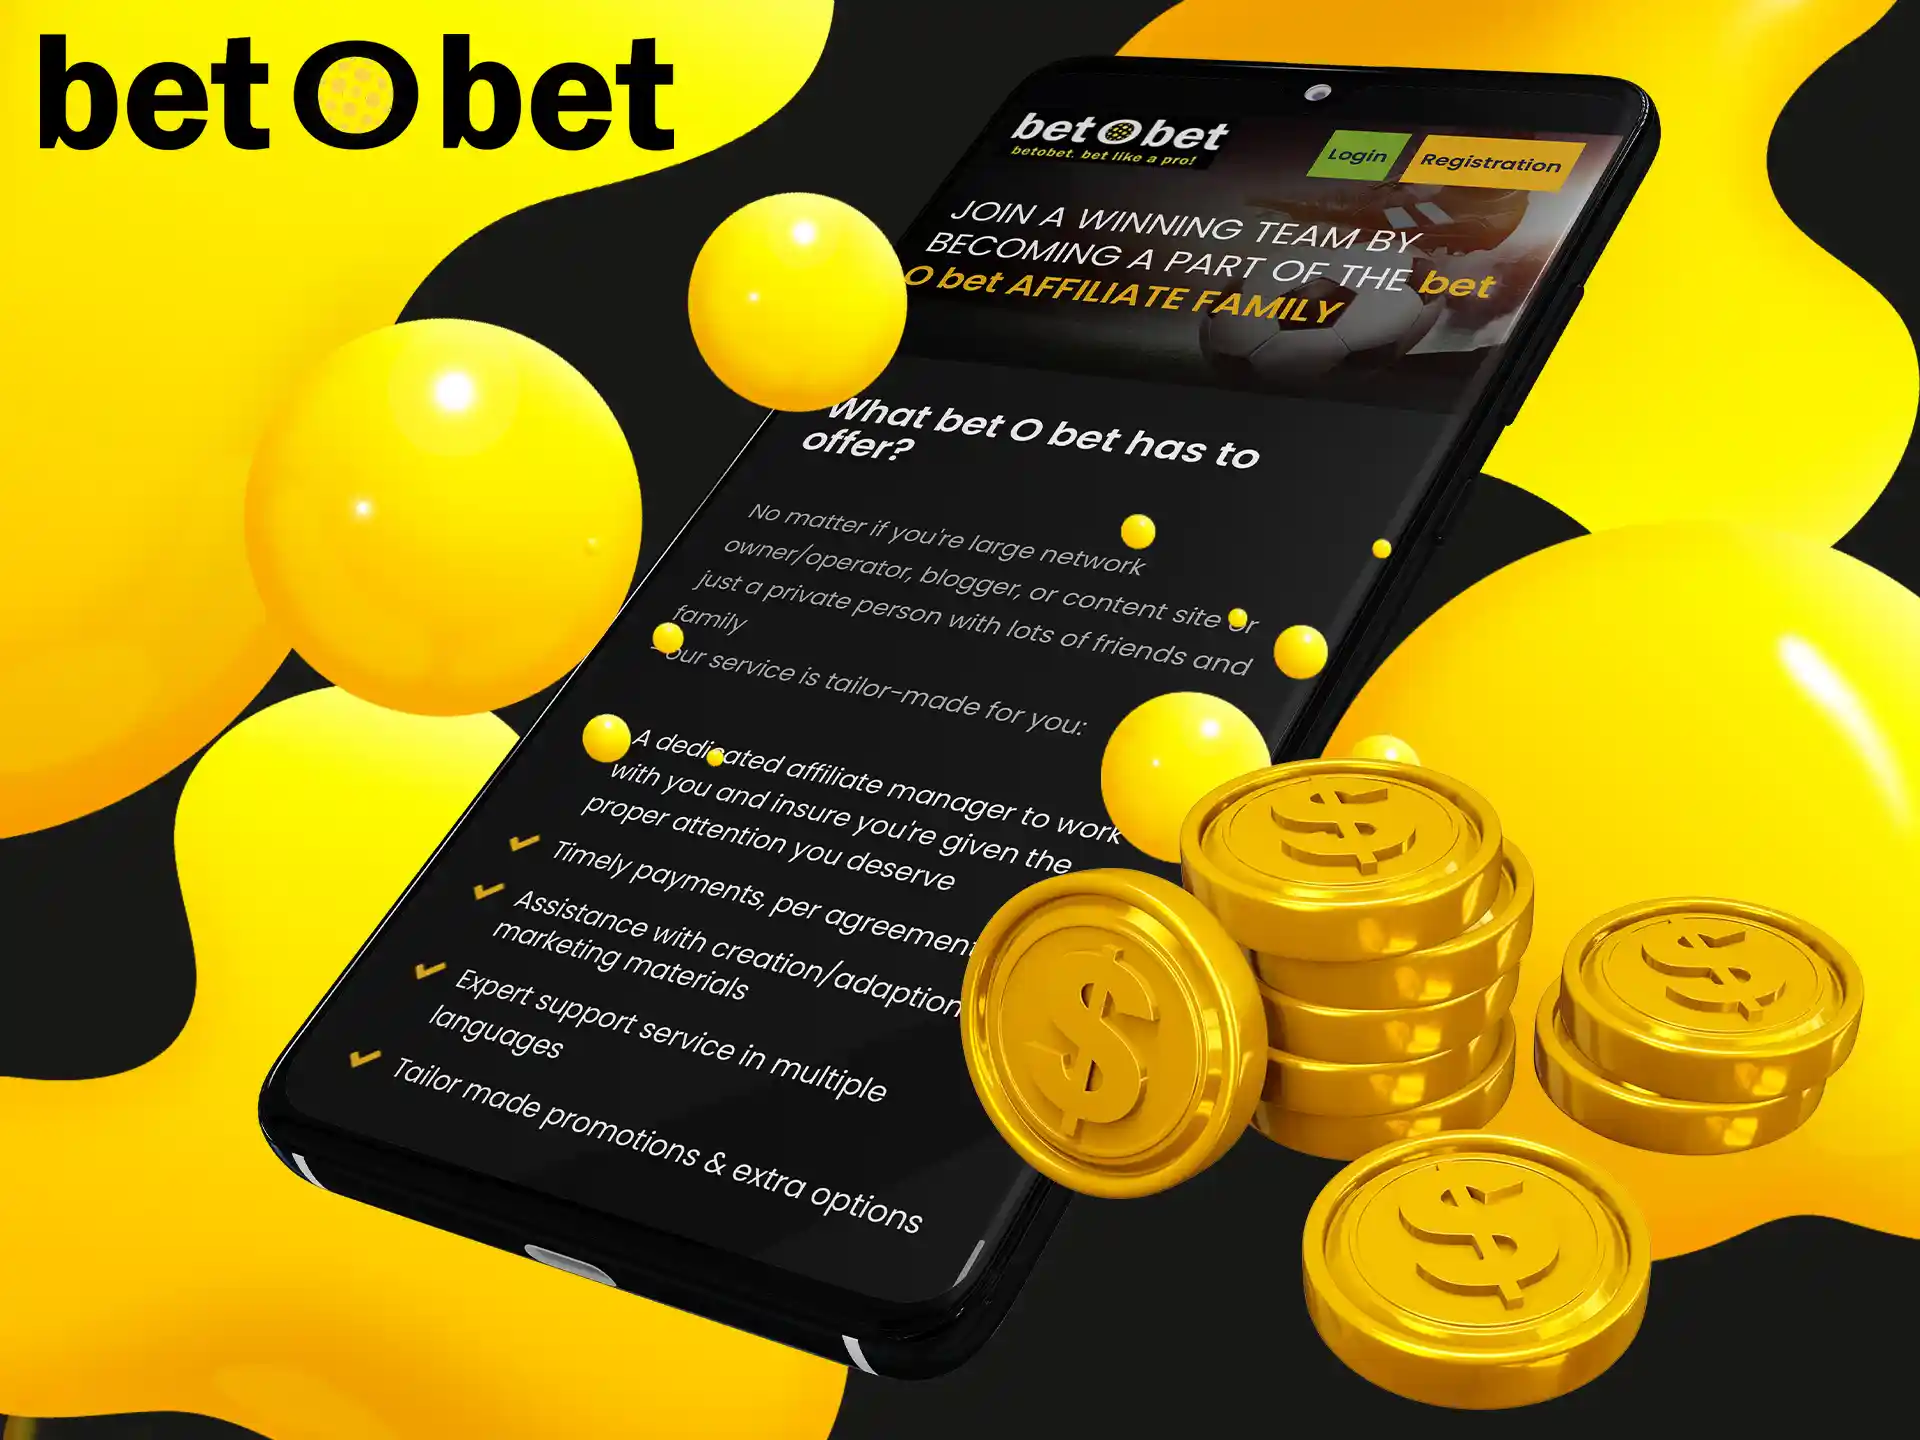 Get money from gaming for life with Betobet's affiliate program.